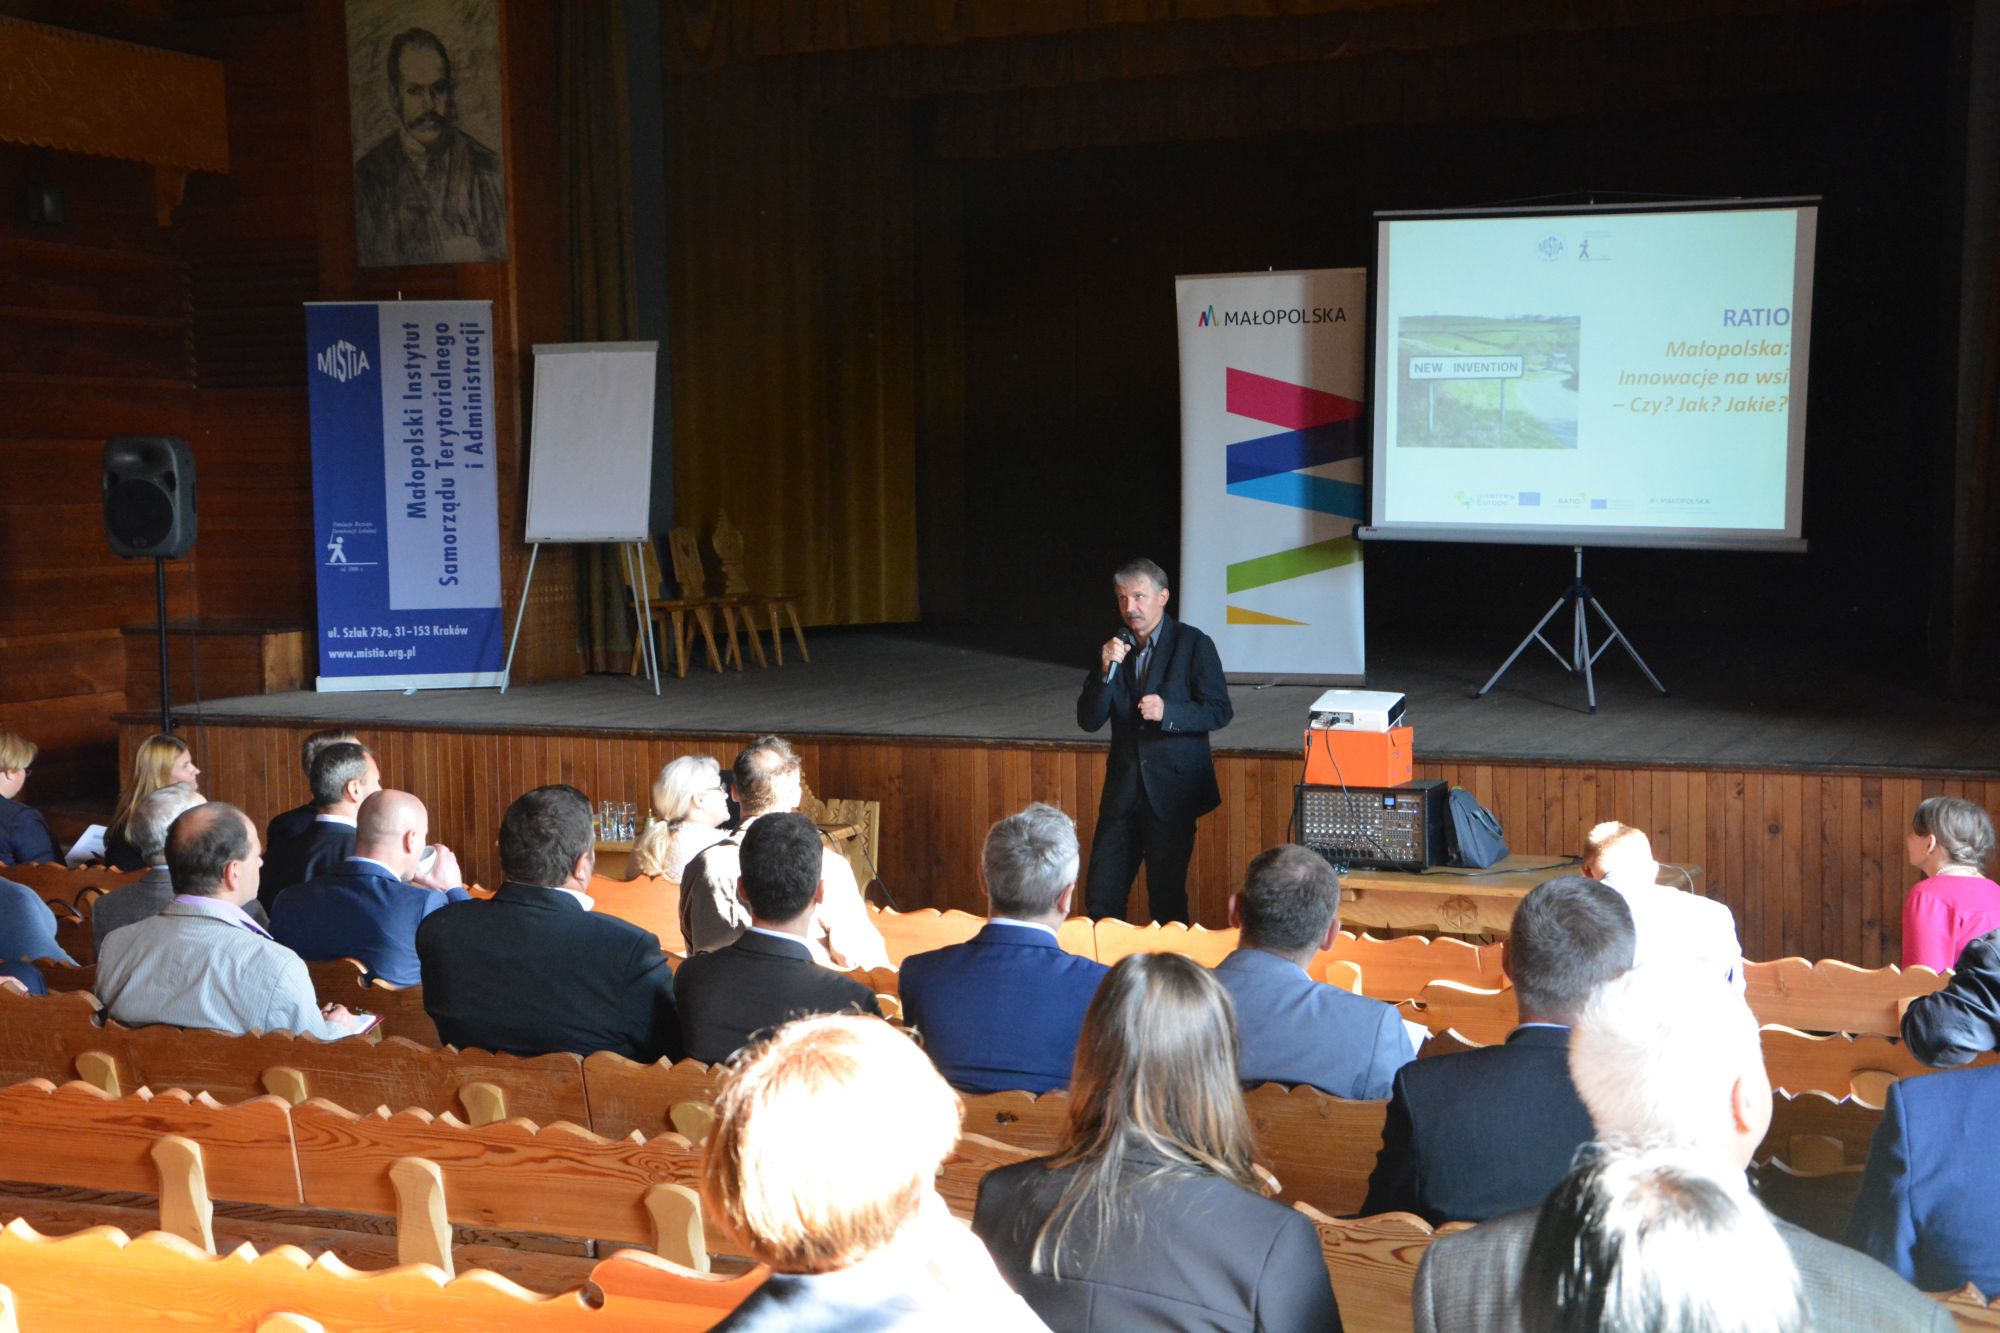 Conference "Innovation in Malopolska Rural Areas"